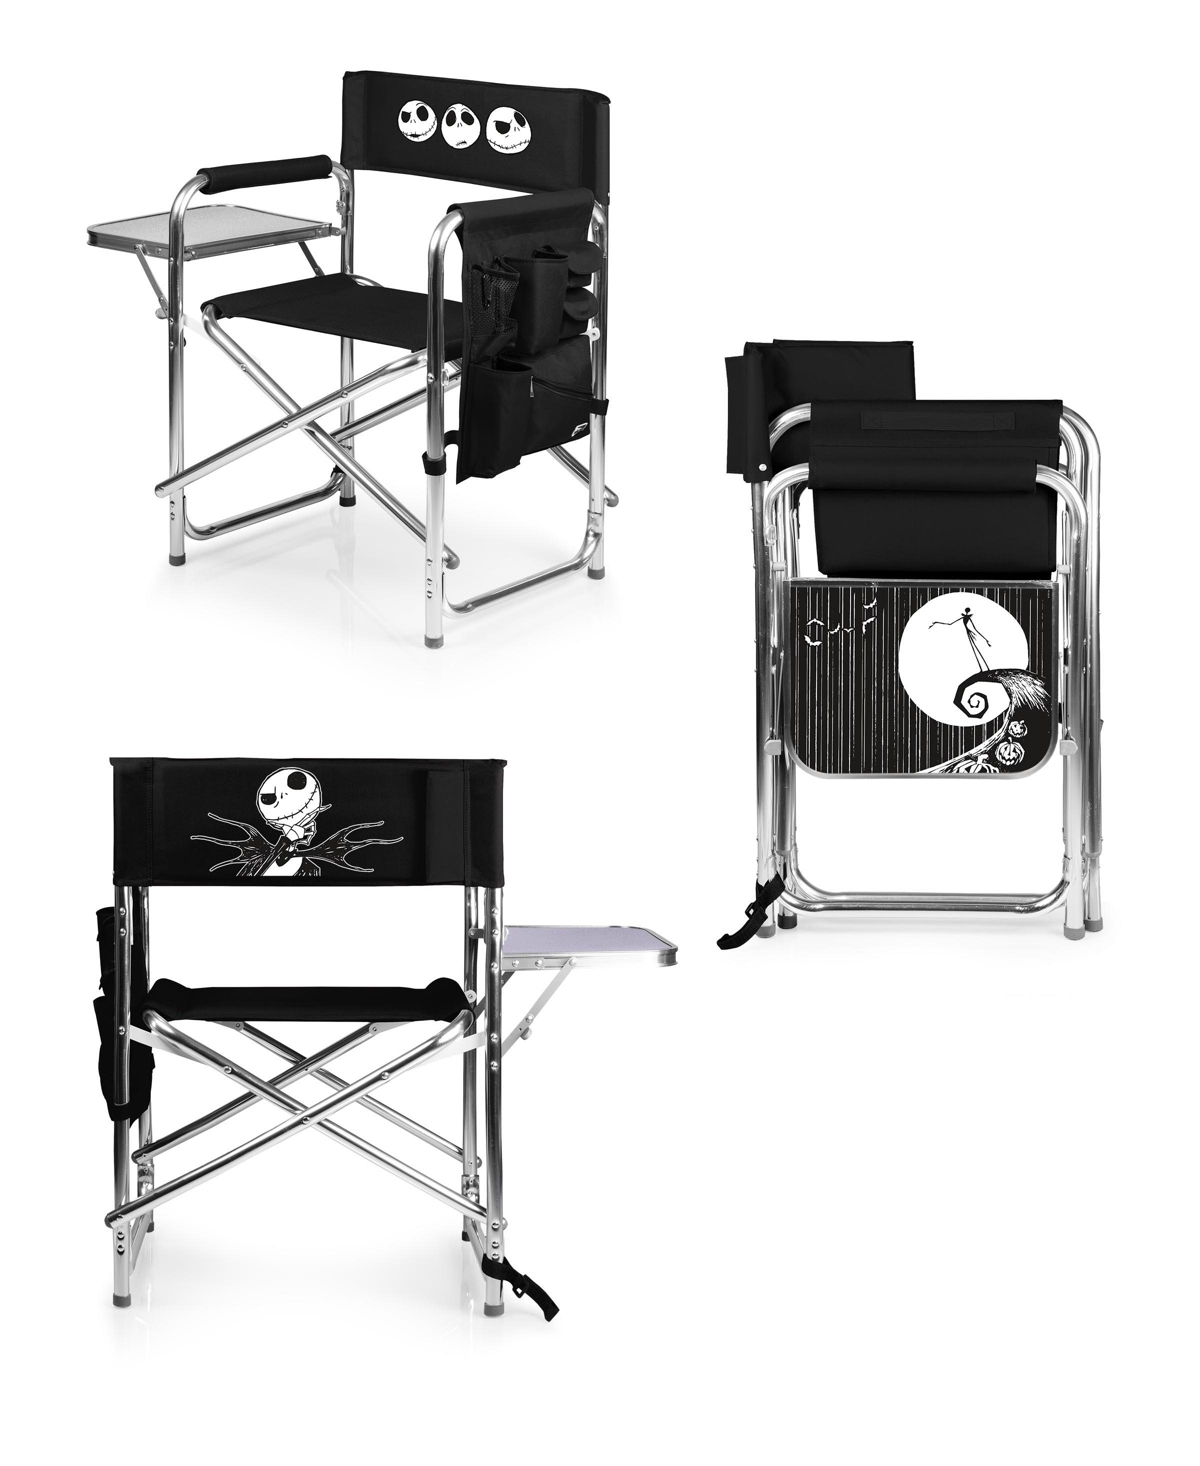 Oniva by Picnic Time Disney's Nightmare Before Chairstmas Sports Chair - Black